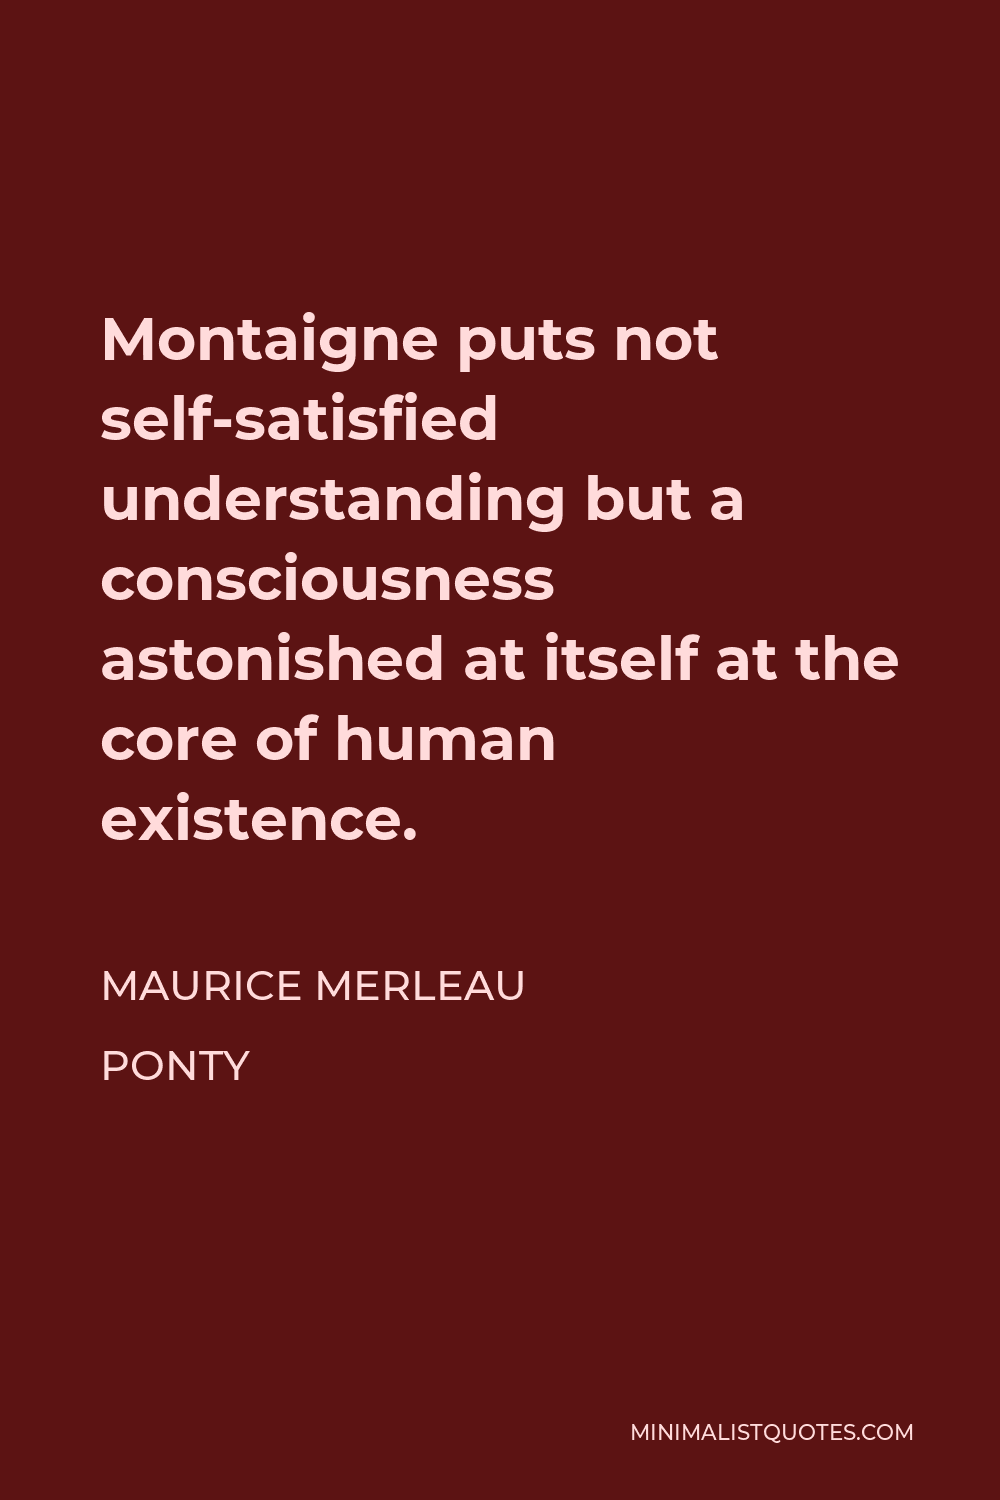 Maurice Merleau Ponty Quote - Montaigne puts not self-satisfied understanding but a consciousness astonished at itself at the core of human existence.